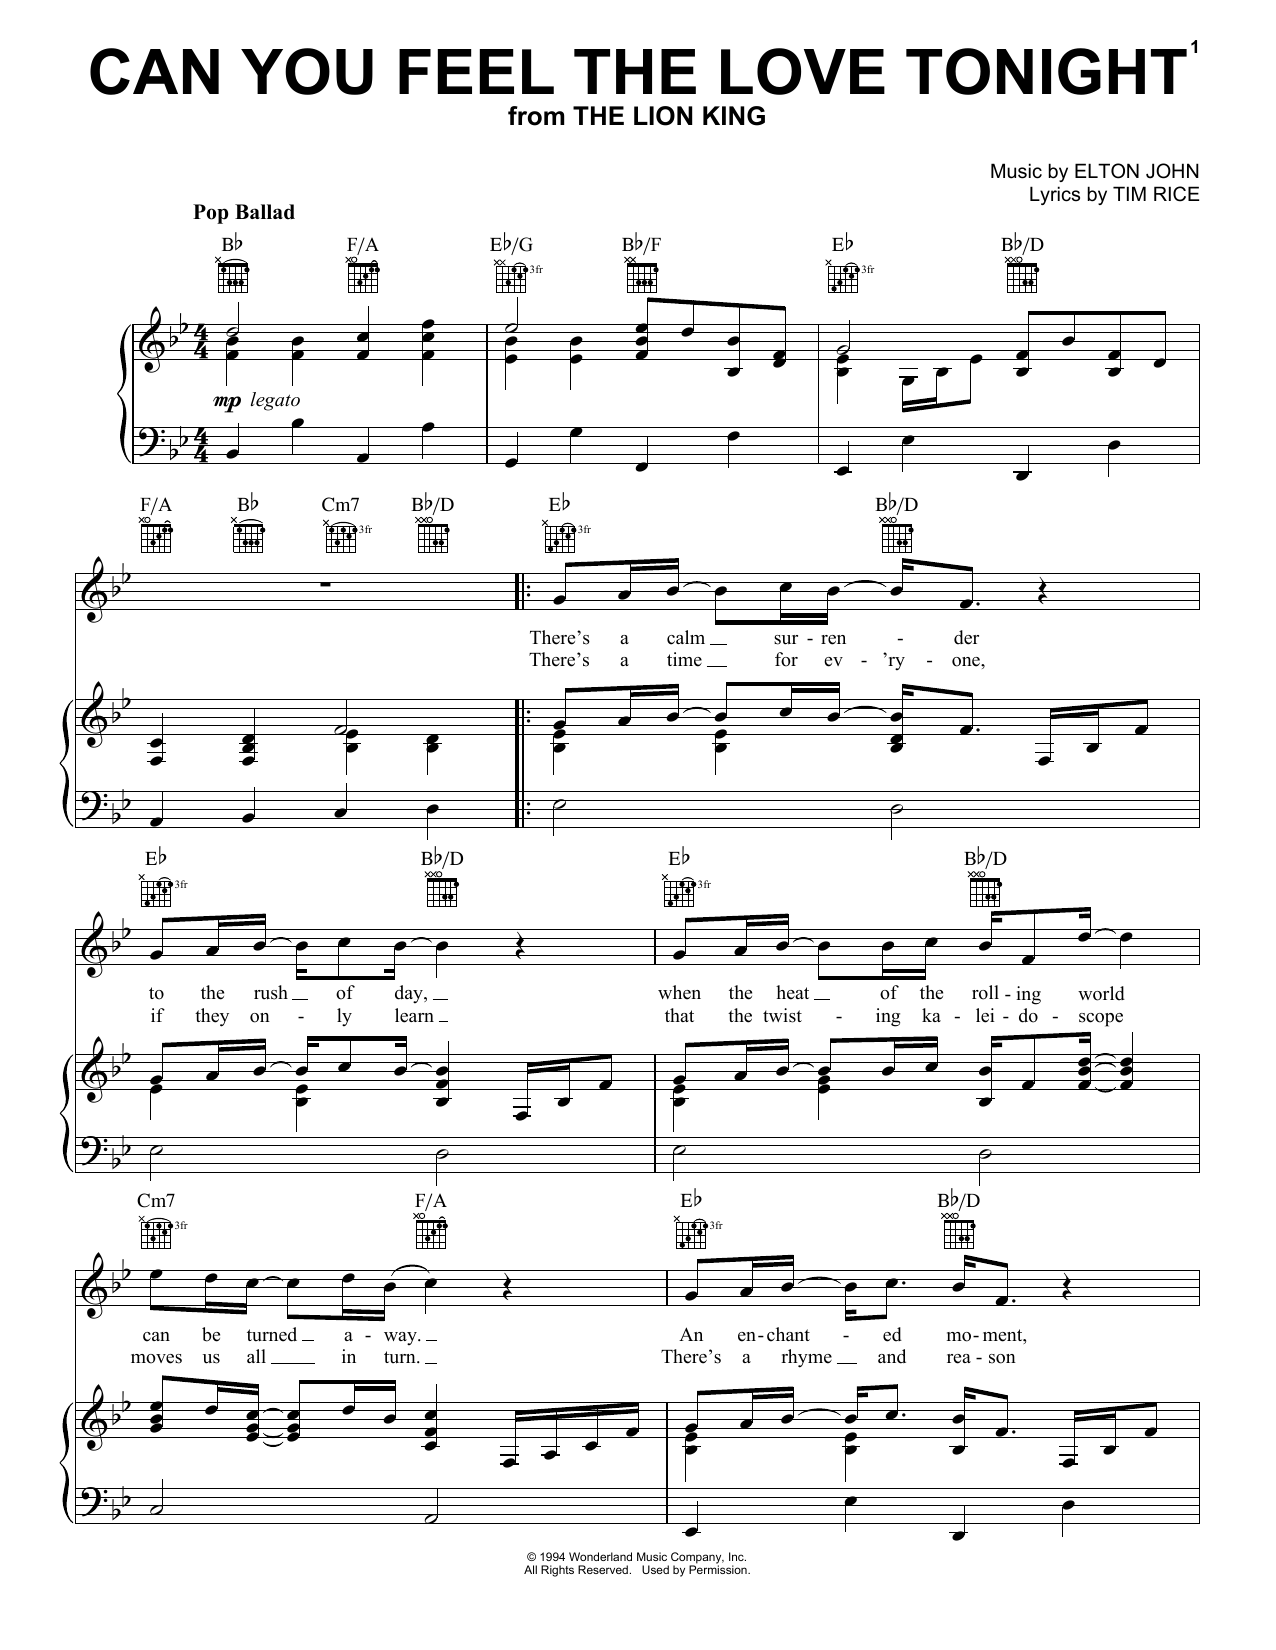 Can You Feel The Love Tonight (from The Lion King) sheet music